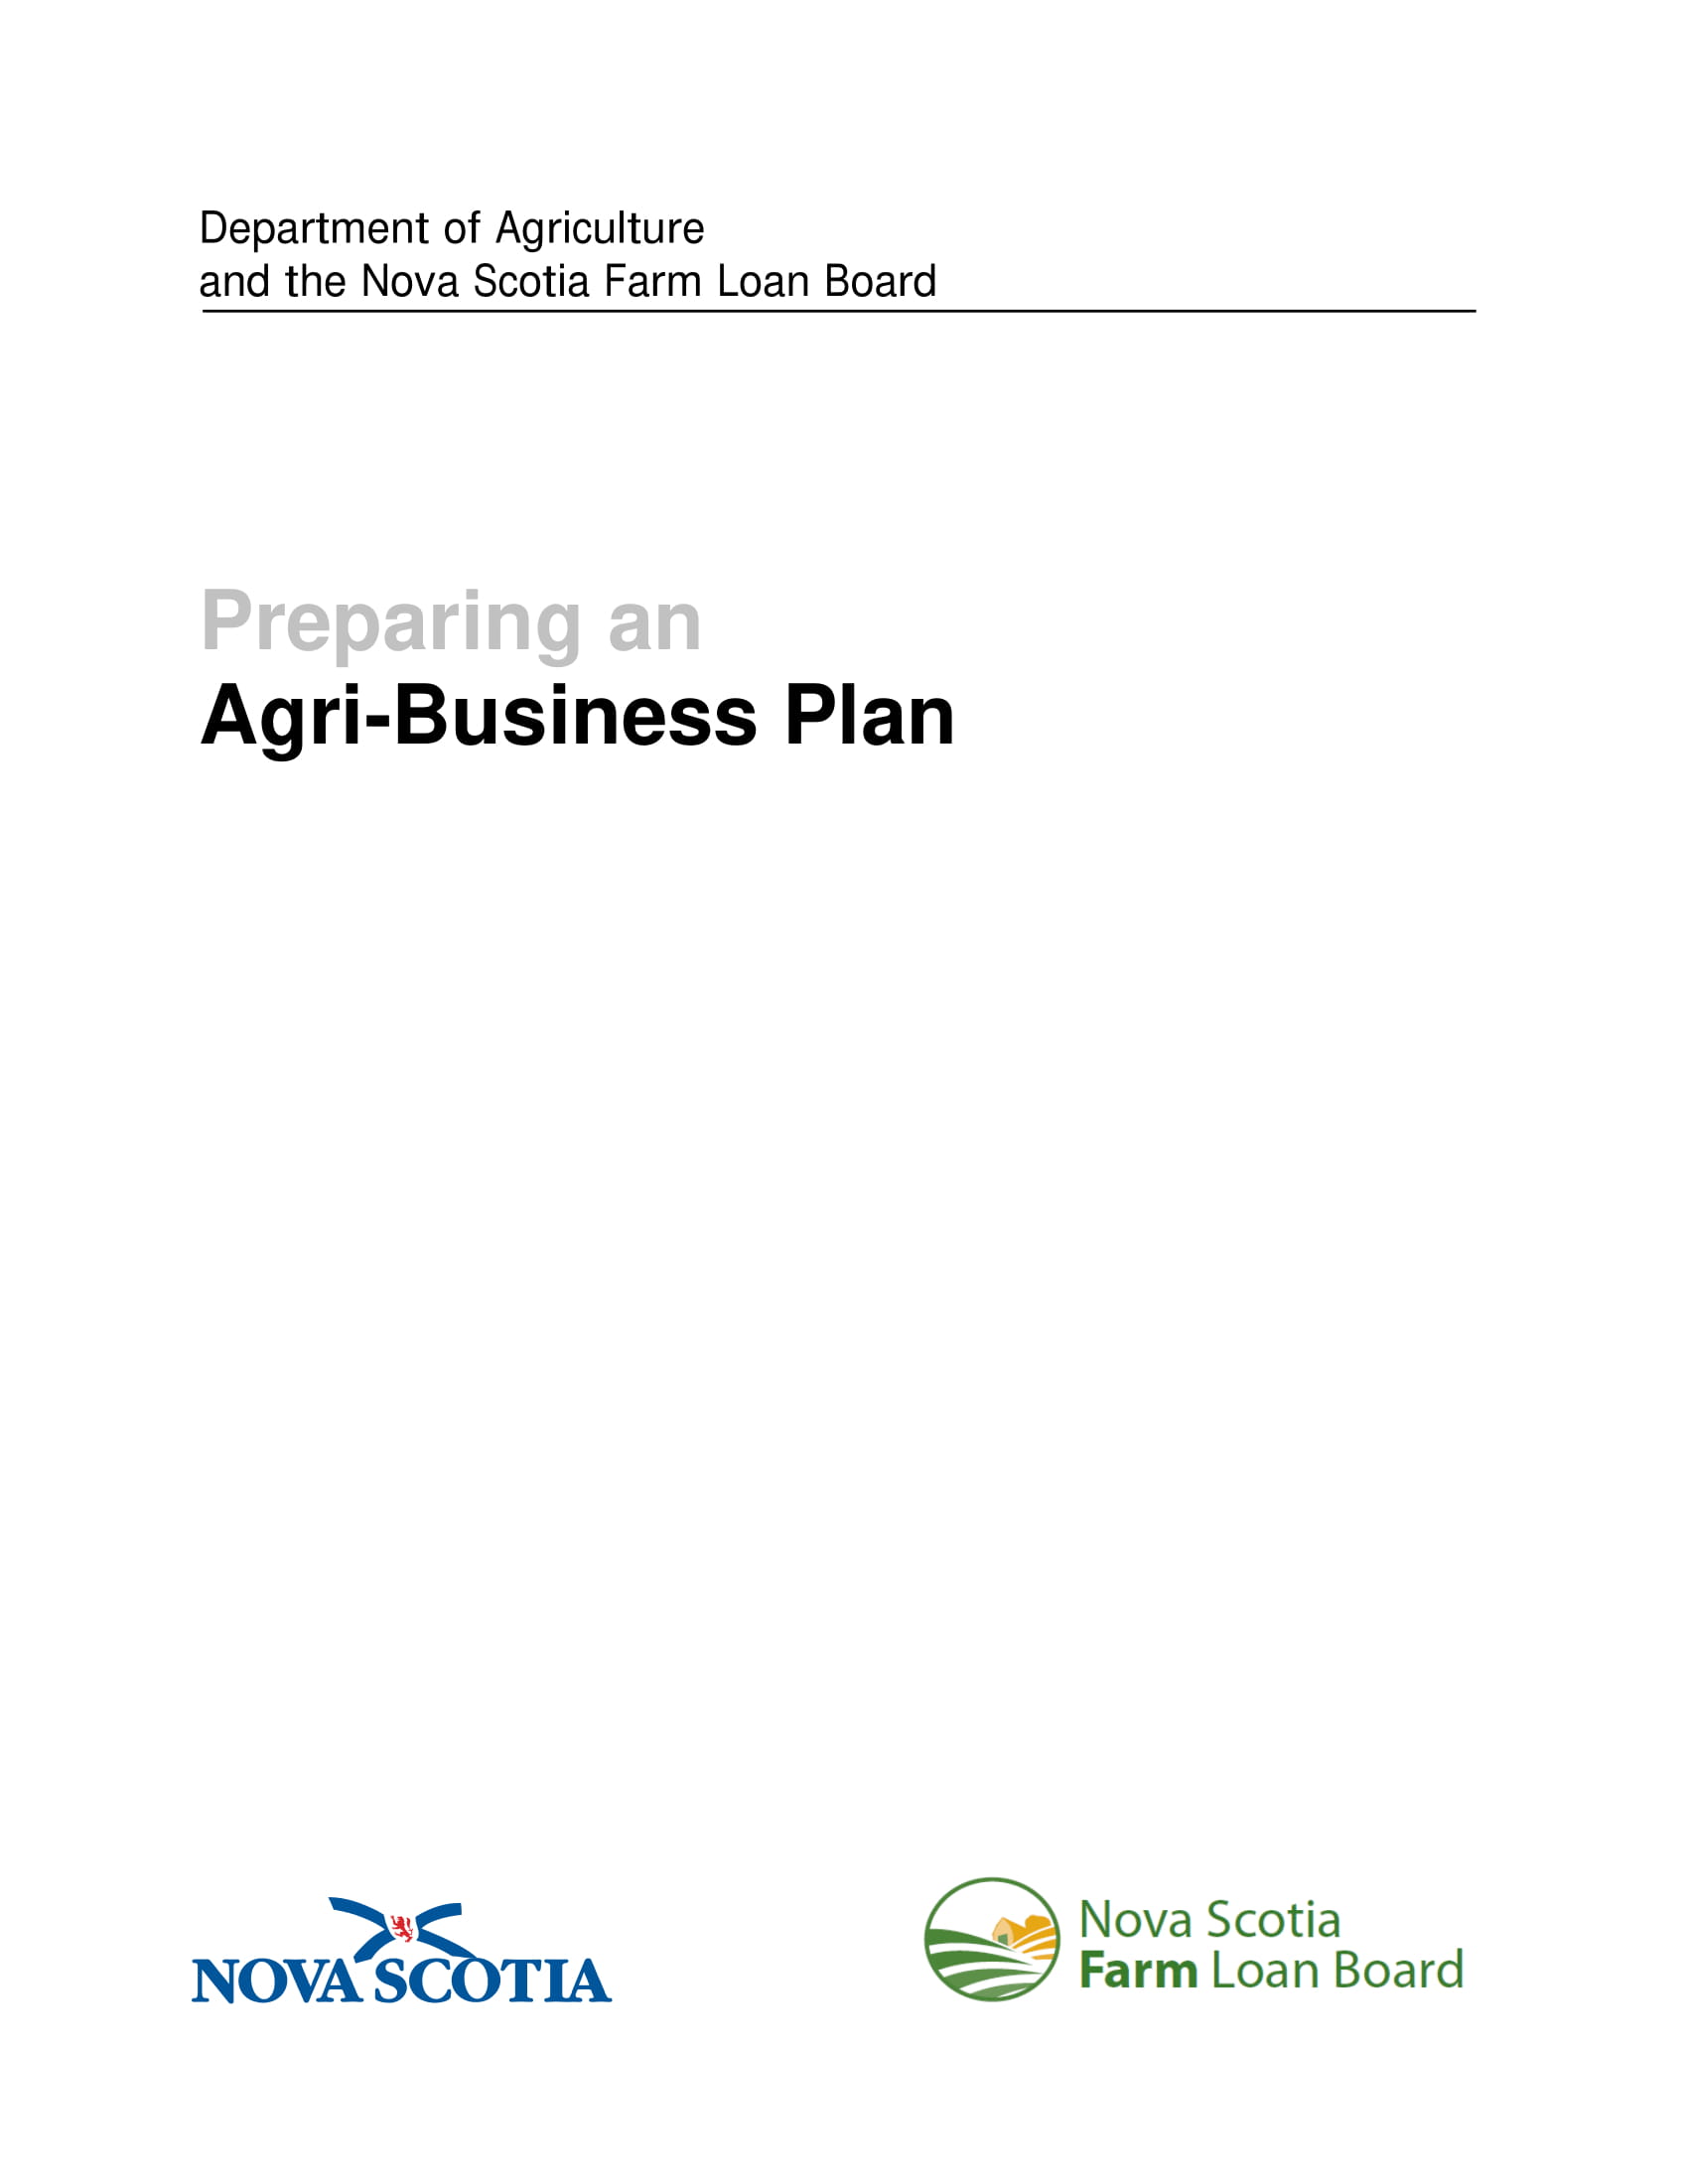 example of agribusiness business plan